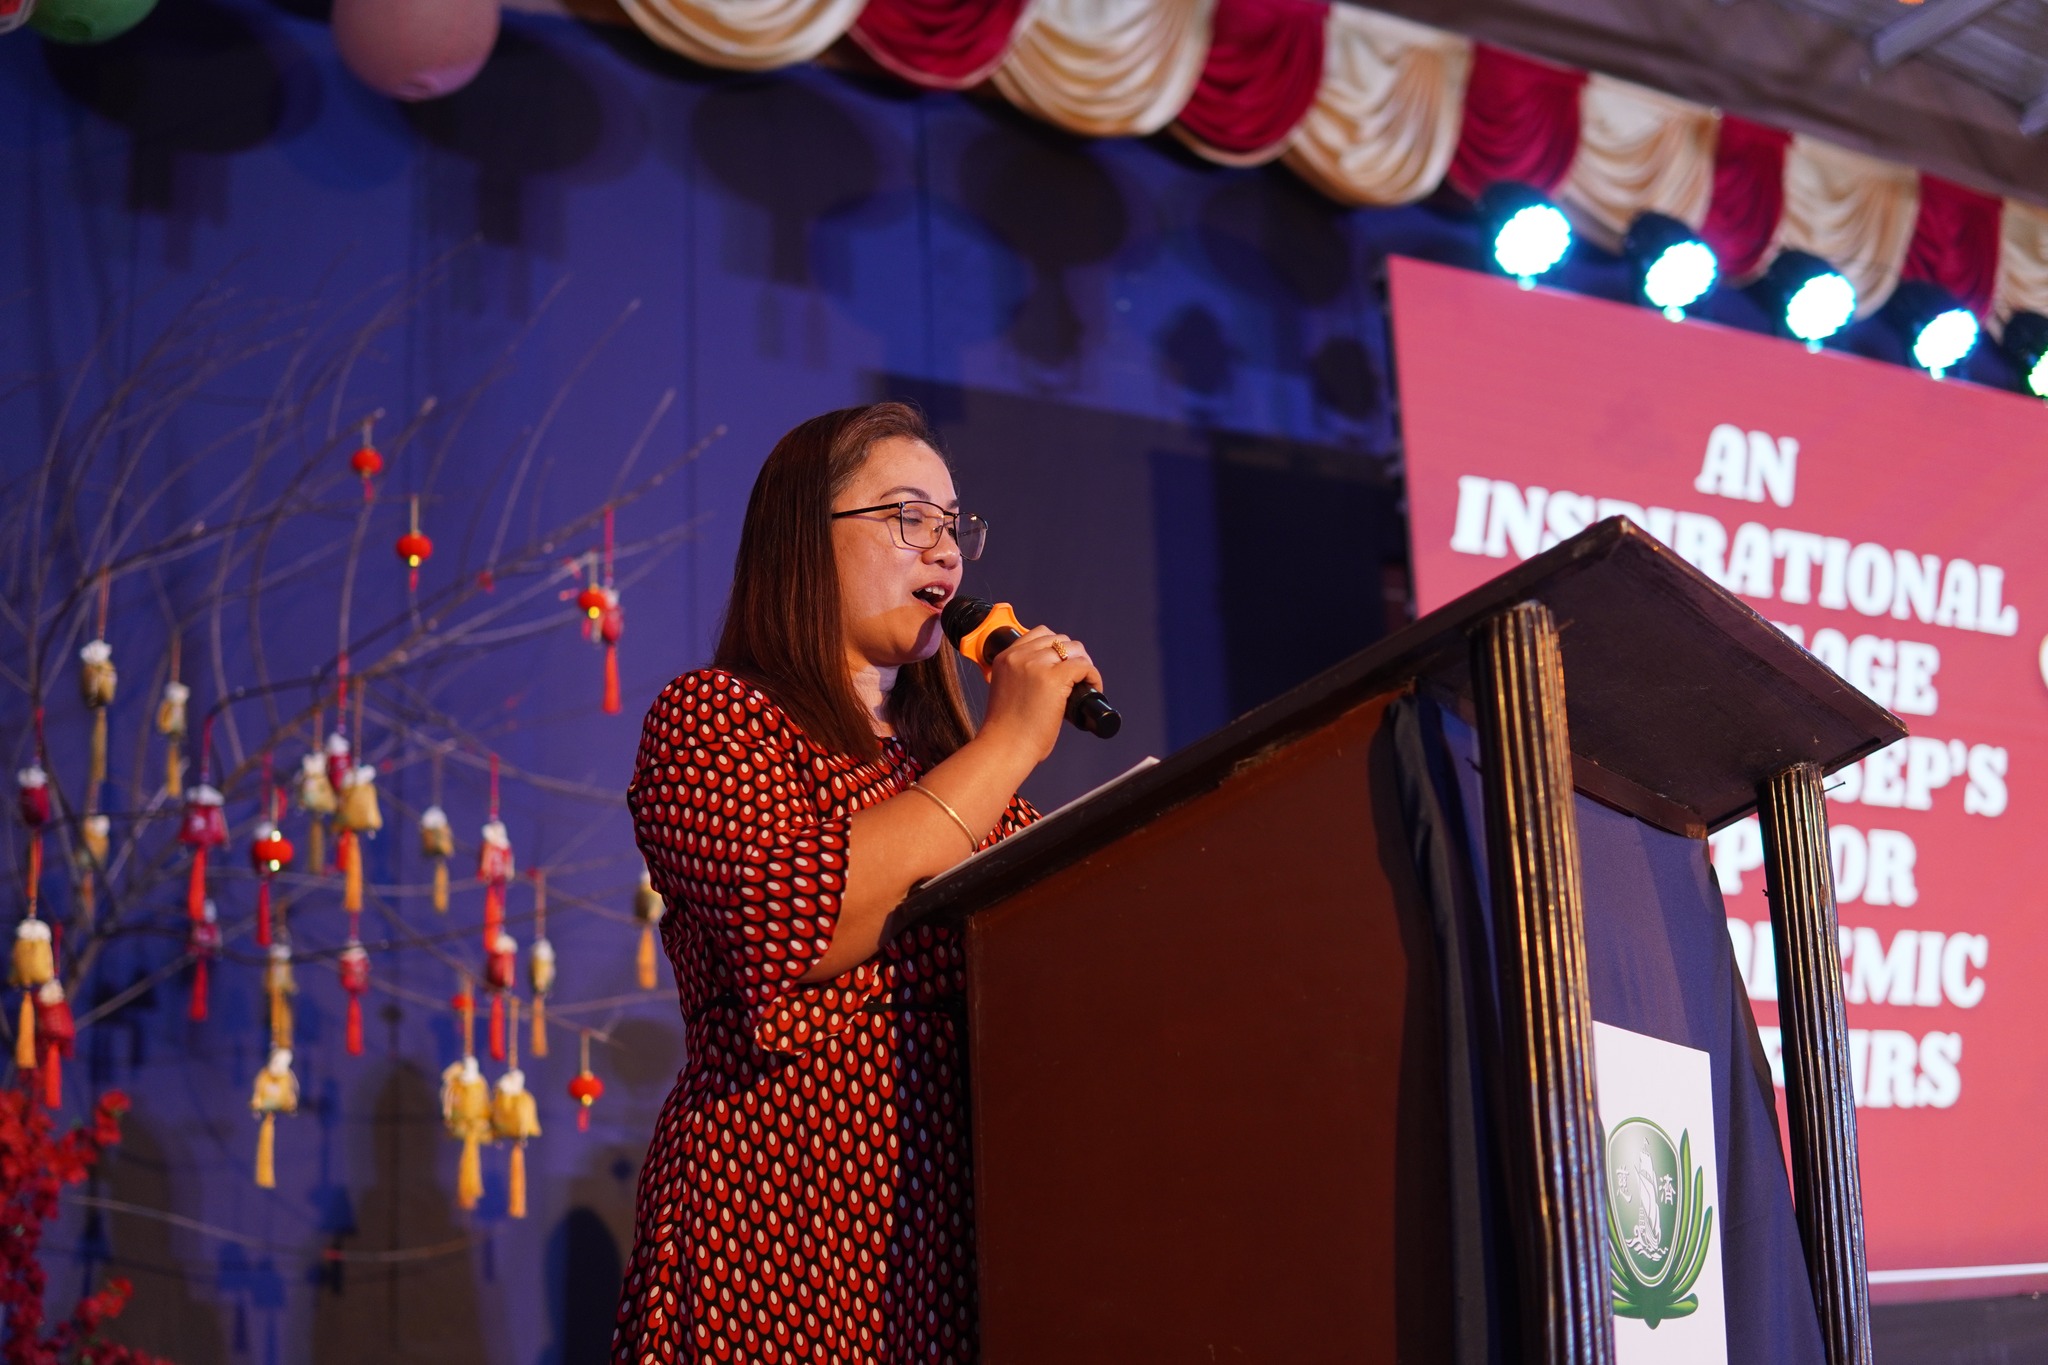 Dr. Jeneifer C. Nueva, USeP’s Vice President for Academic Affairs, personally delivered the message of thanks from USeP's President, Dr. Gabales.【Photo by Tzu Chi Davao】